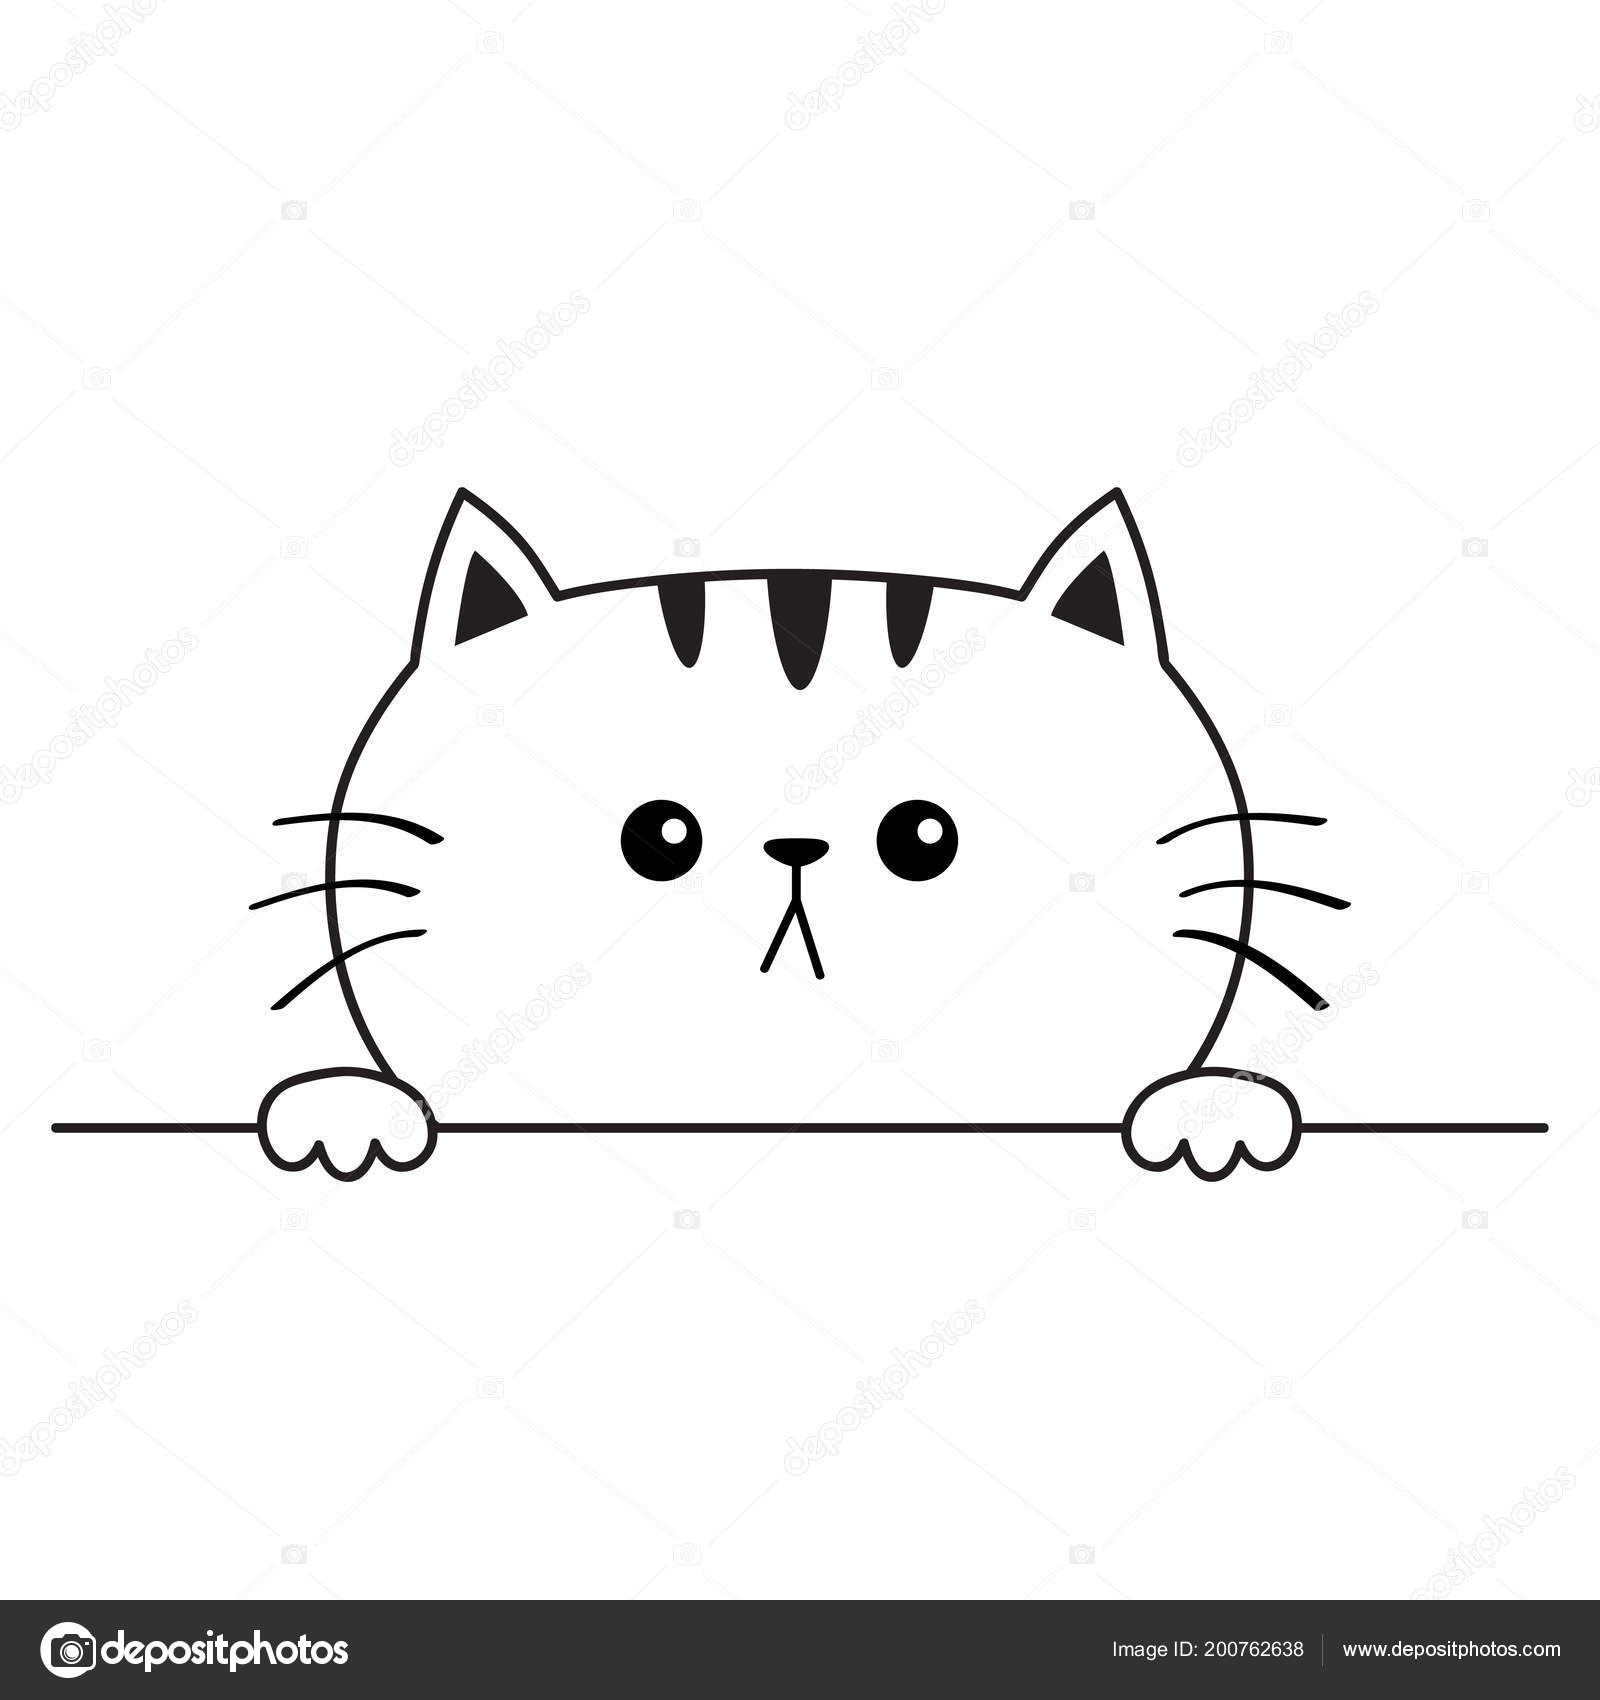 Cute cat face head icon cartoon funny character Vector Image